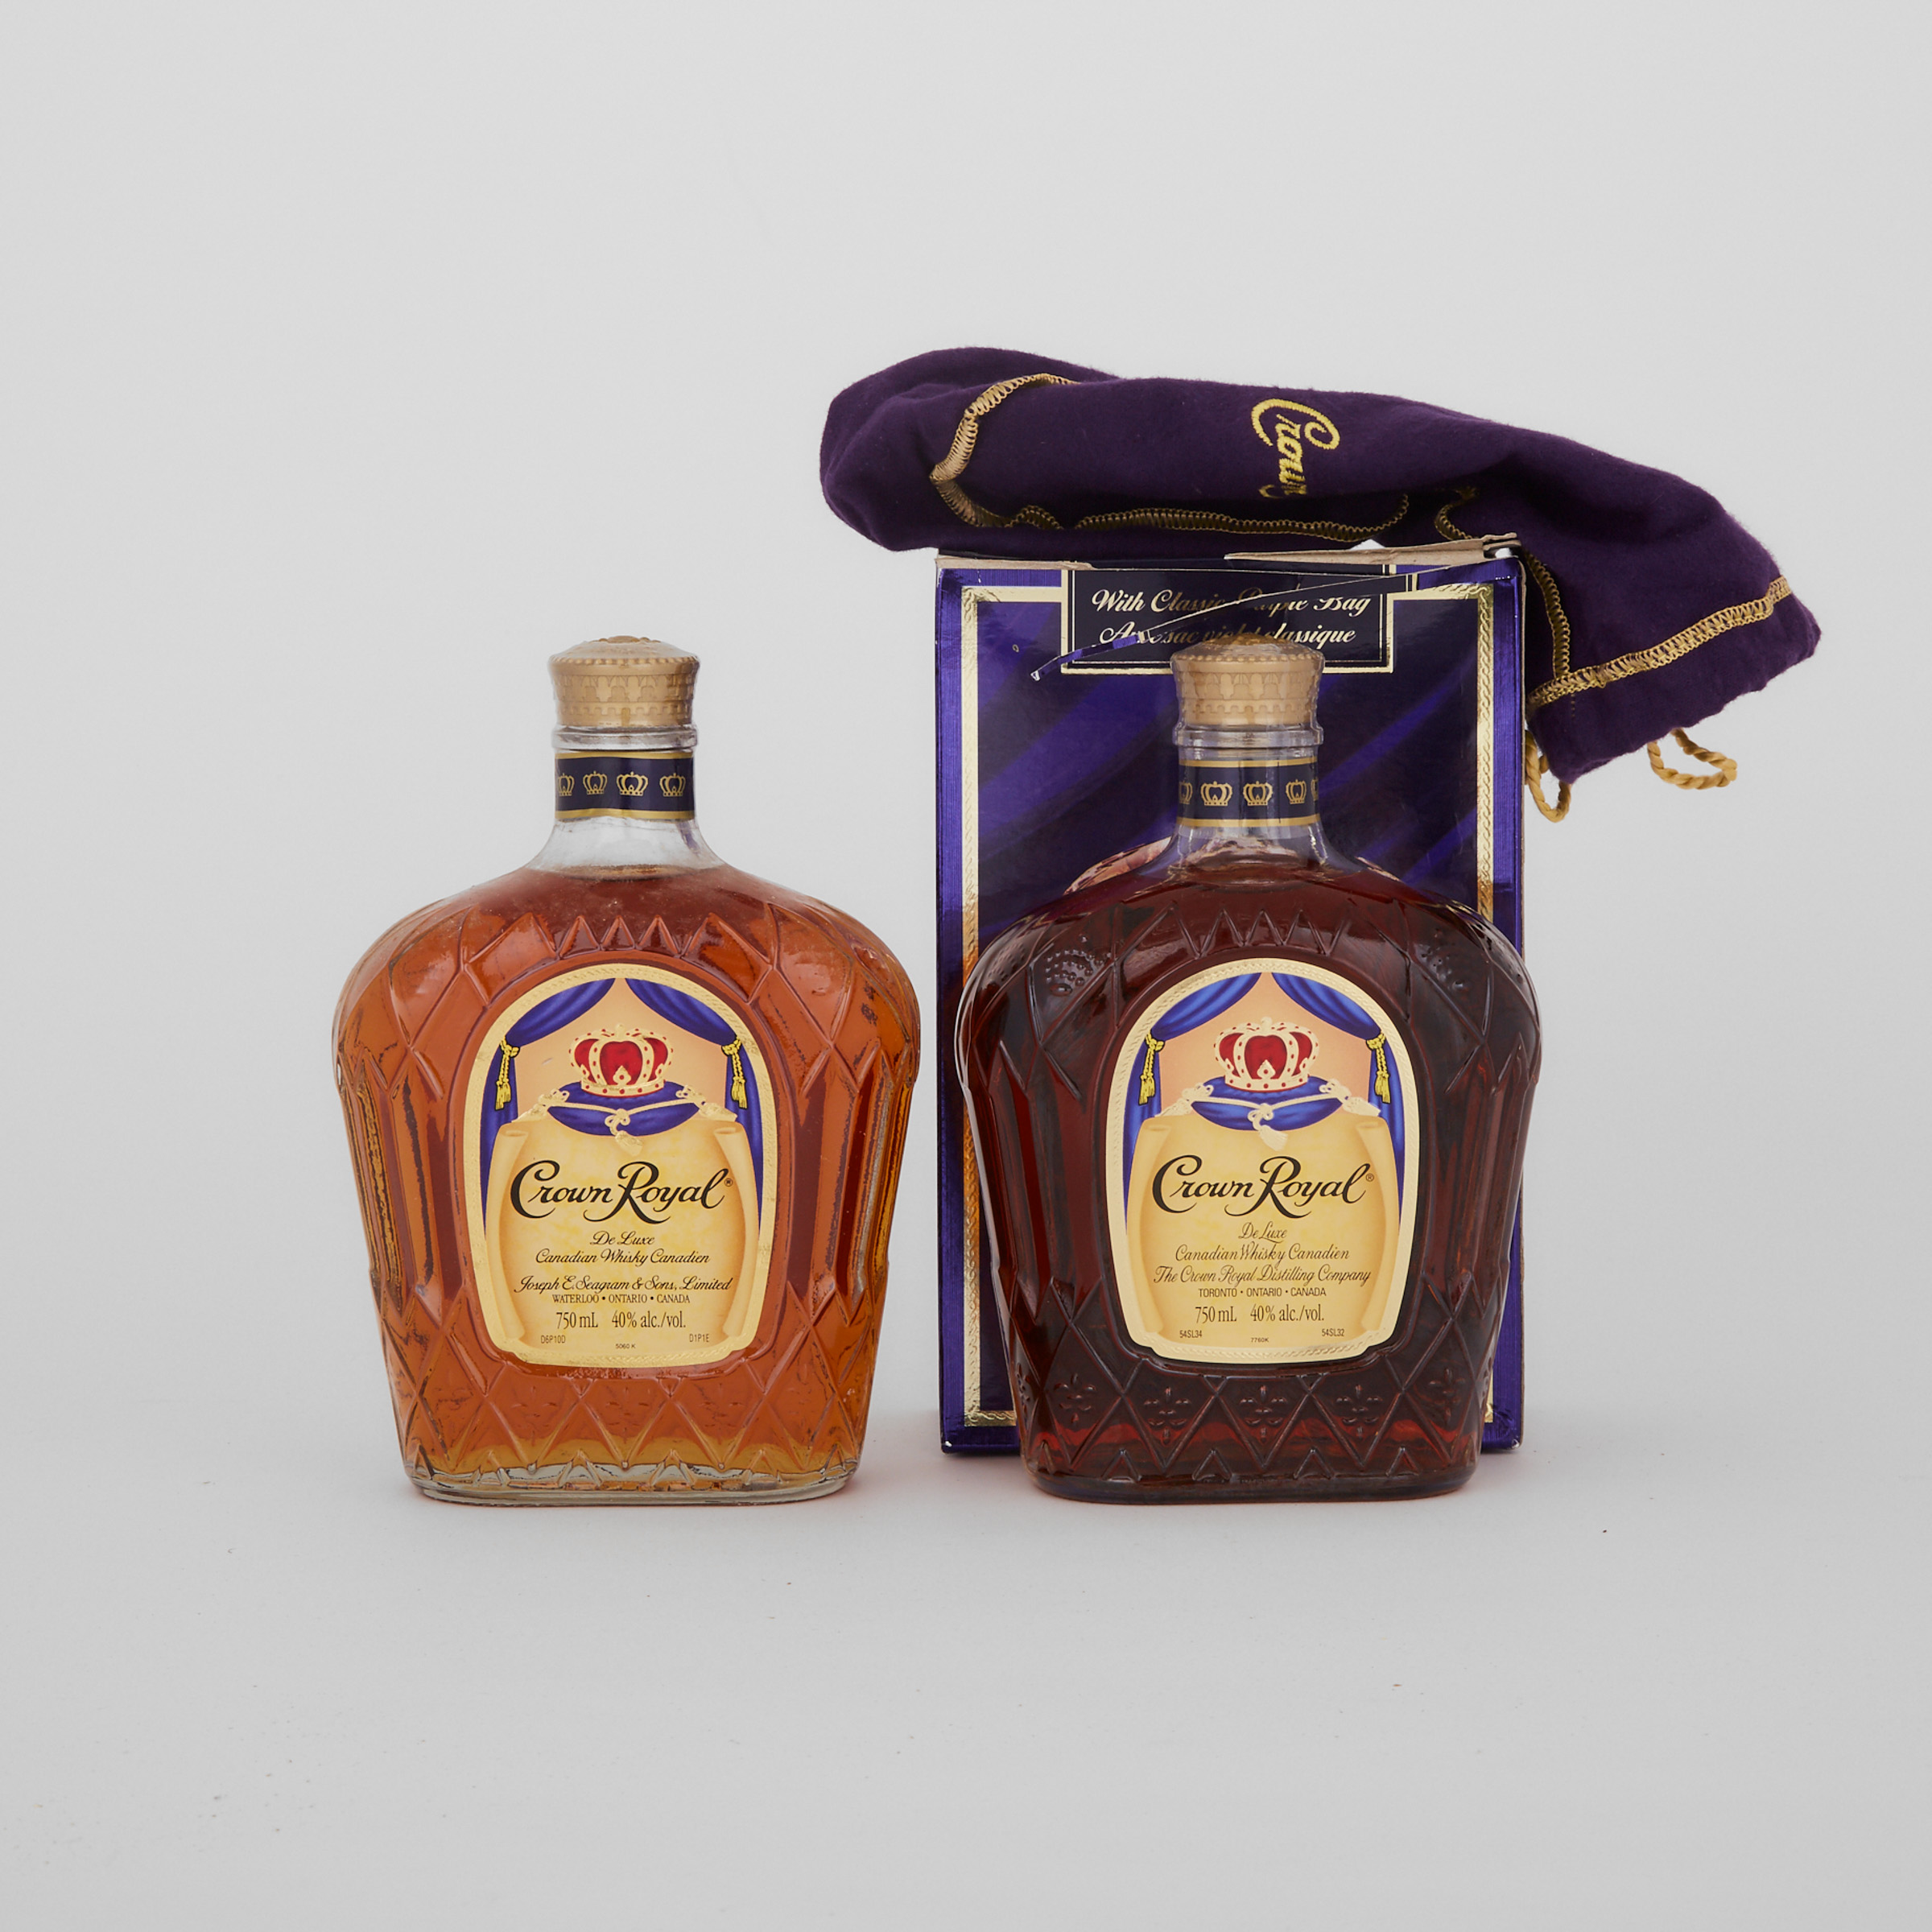 CROWN ROYAL DELUXE CANADIAN WHISKY (TWO 750 ML)